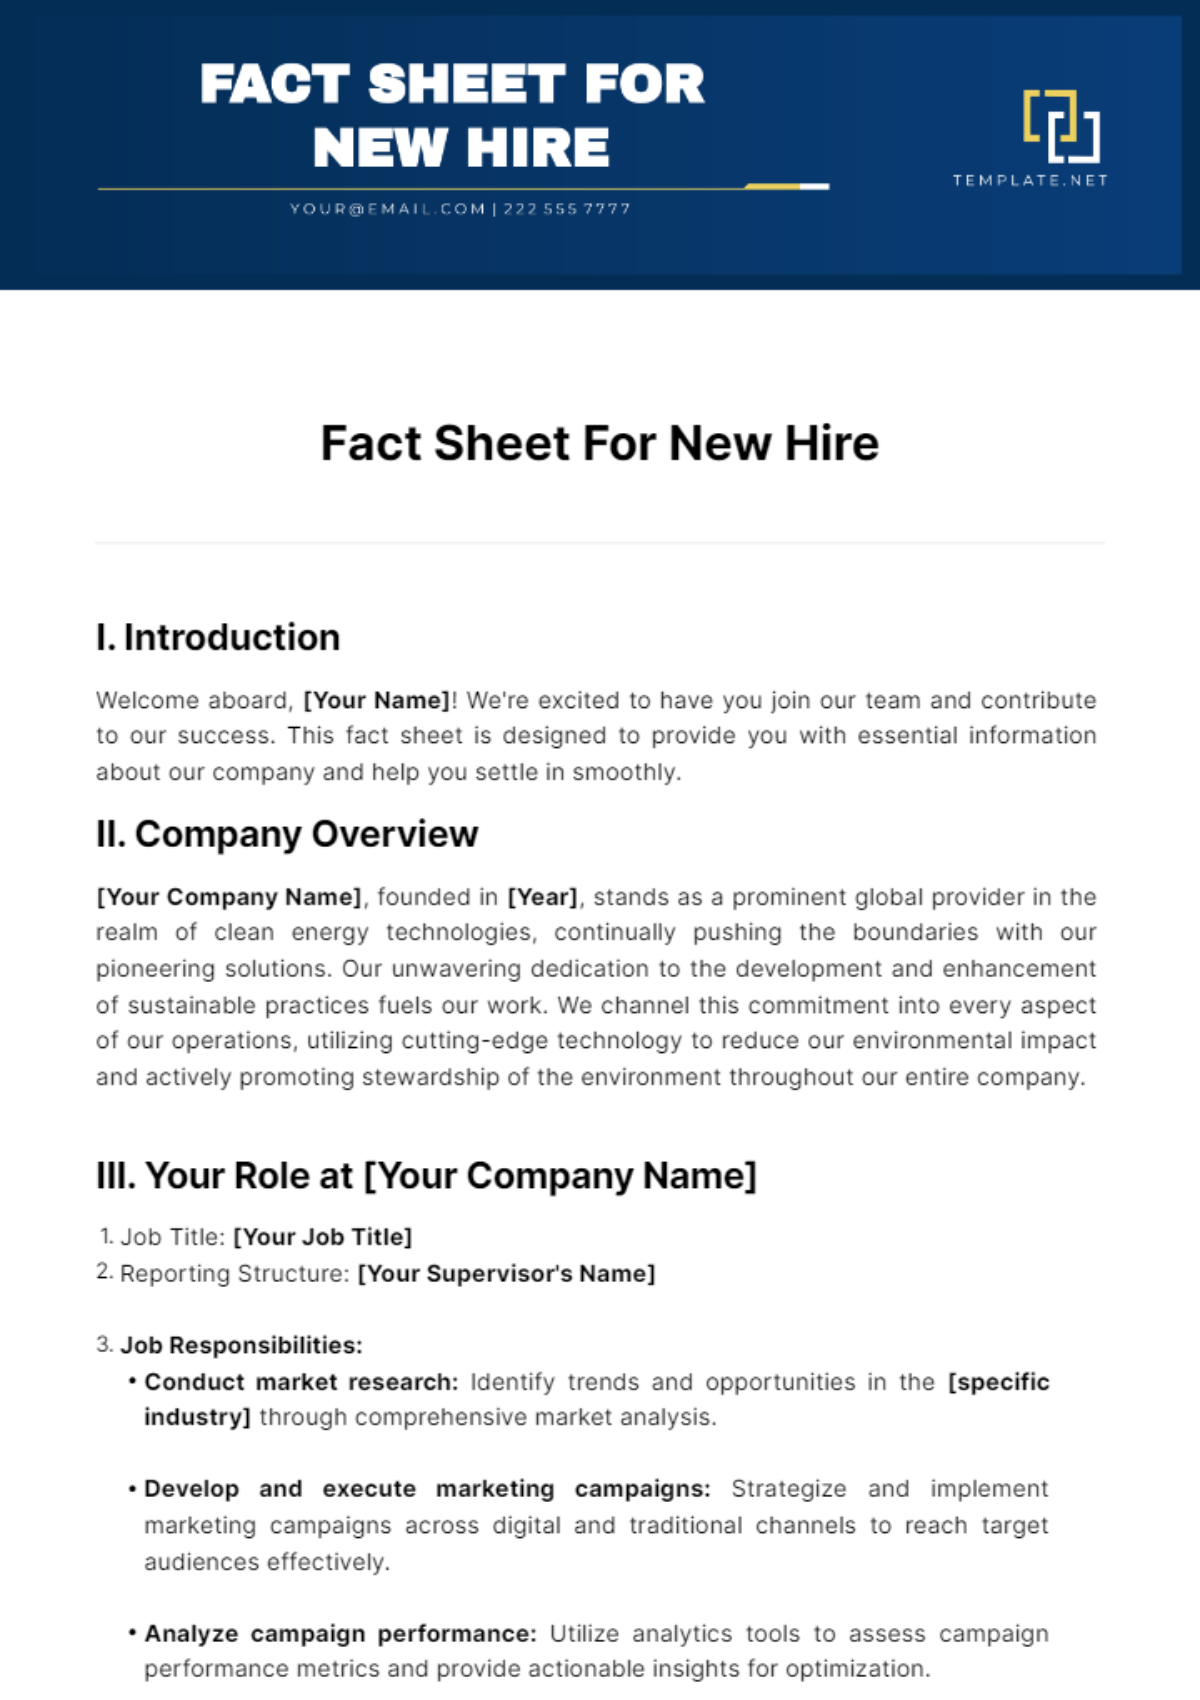 Fact Sheet For New Hire Template